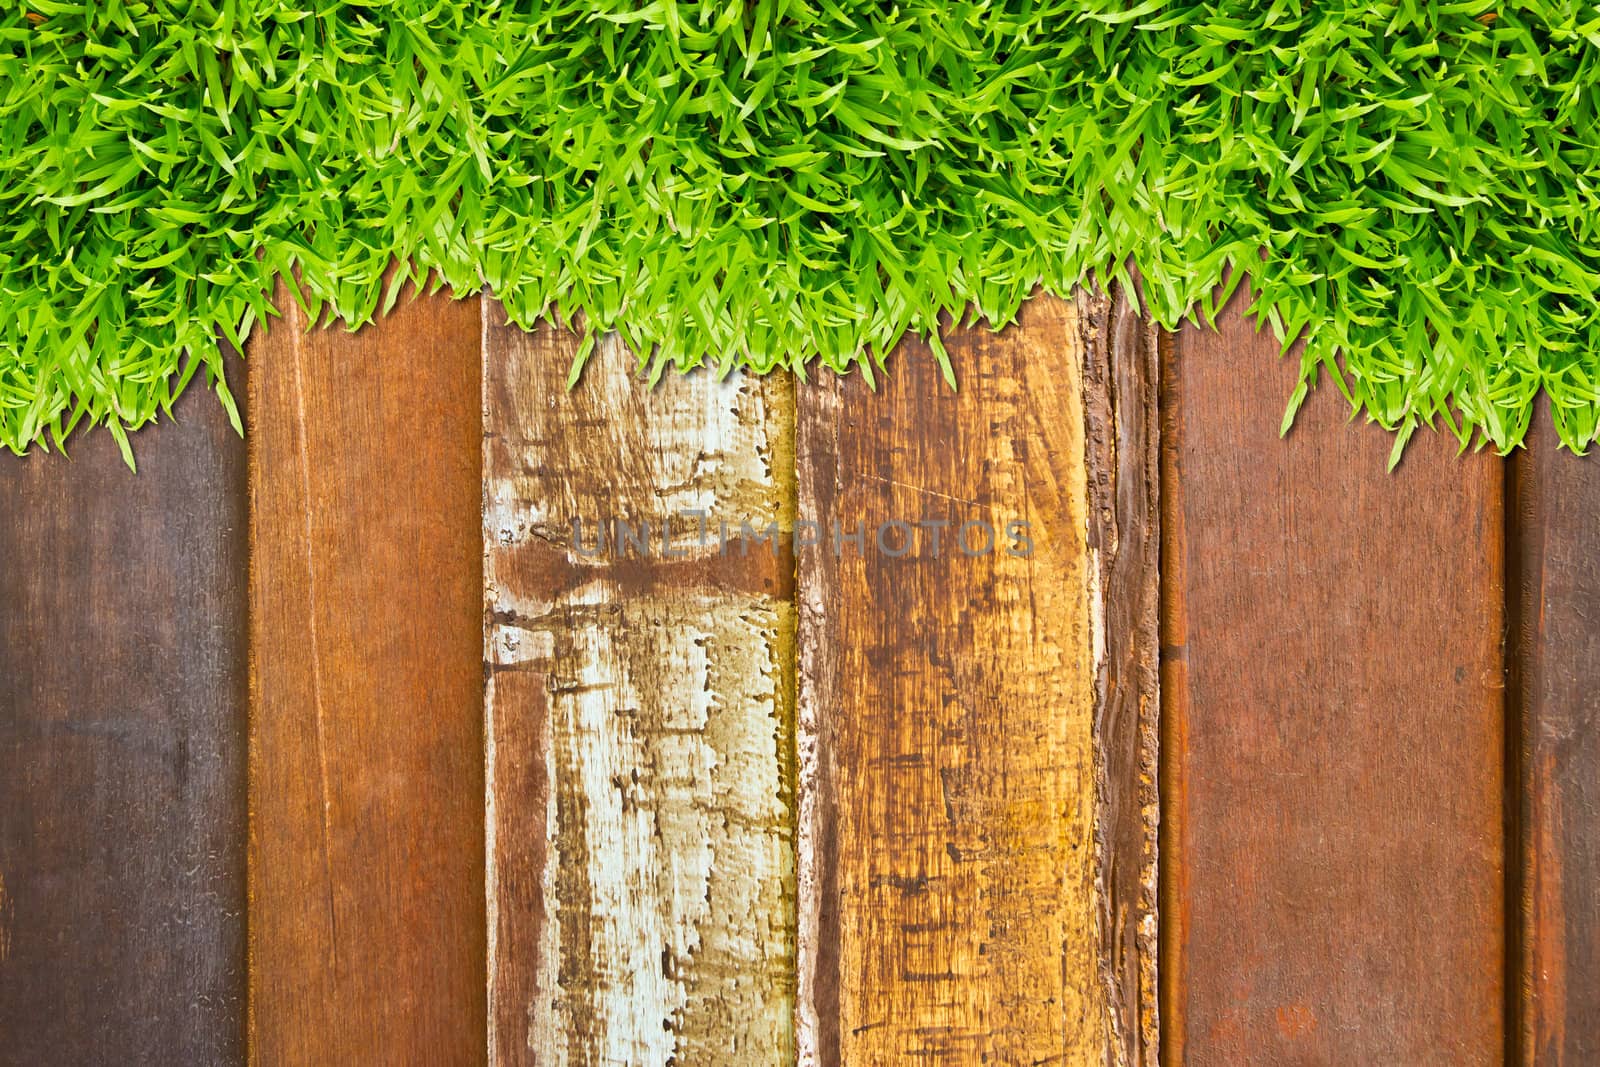 green grass on wood background